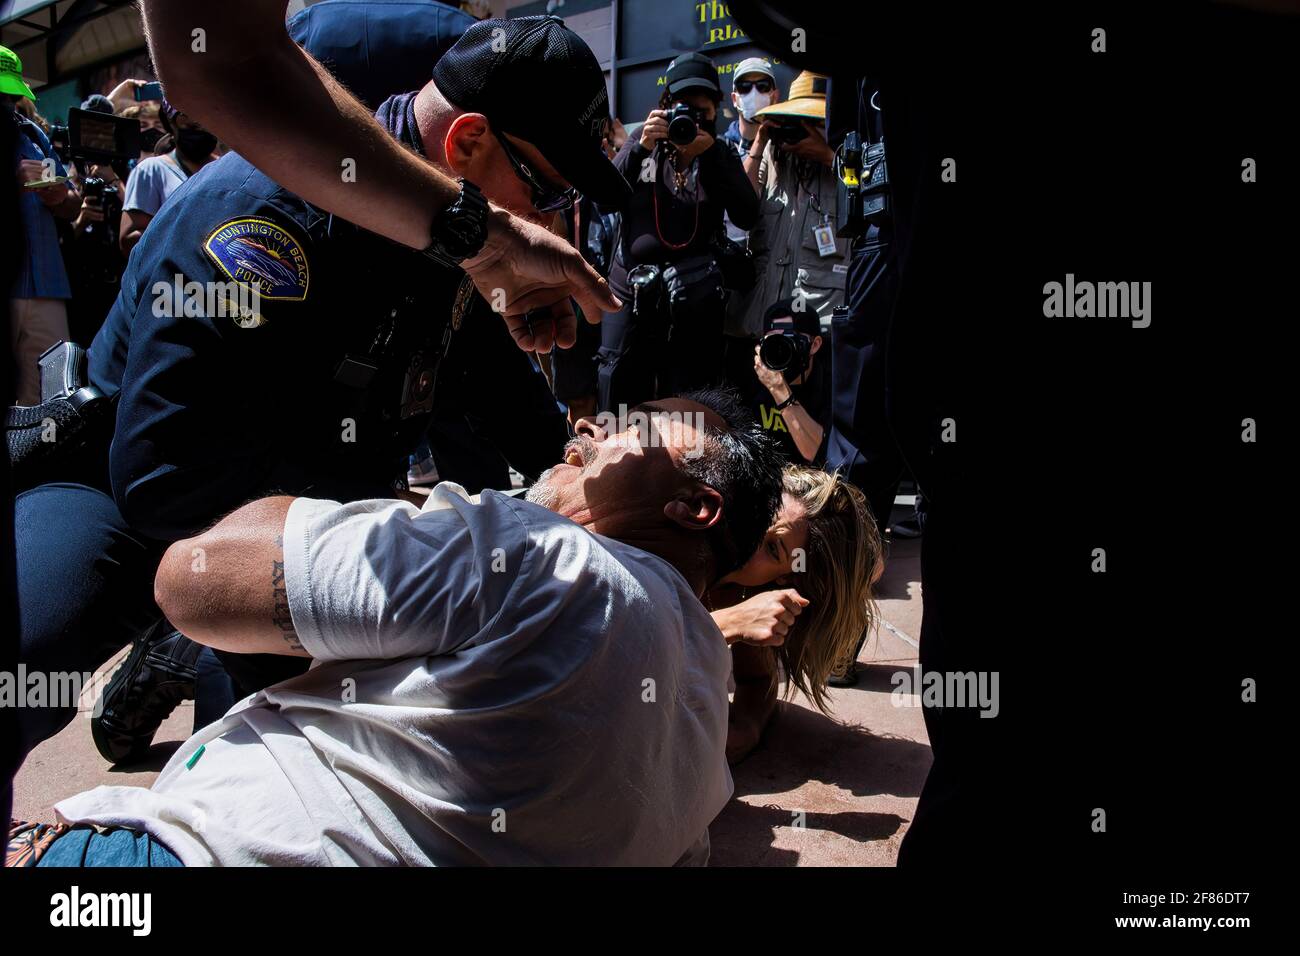 A White Lives Matter protester is shoved to the ground by counter-protesters and eventually surround by police during the demonstration. Upon word spreading amongst various social media and messaging platforms that there was to be a 'White Lives Matter' protest at the Huntington Beach Pier at 1pm, a large group of counter protesters arrived at the pier to stop the 'White Lives Matter' protest. The day resulted to clashes between counter protesters and white lives matter protesters both verbal and physical. Stock Photo